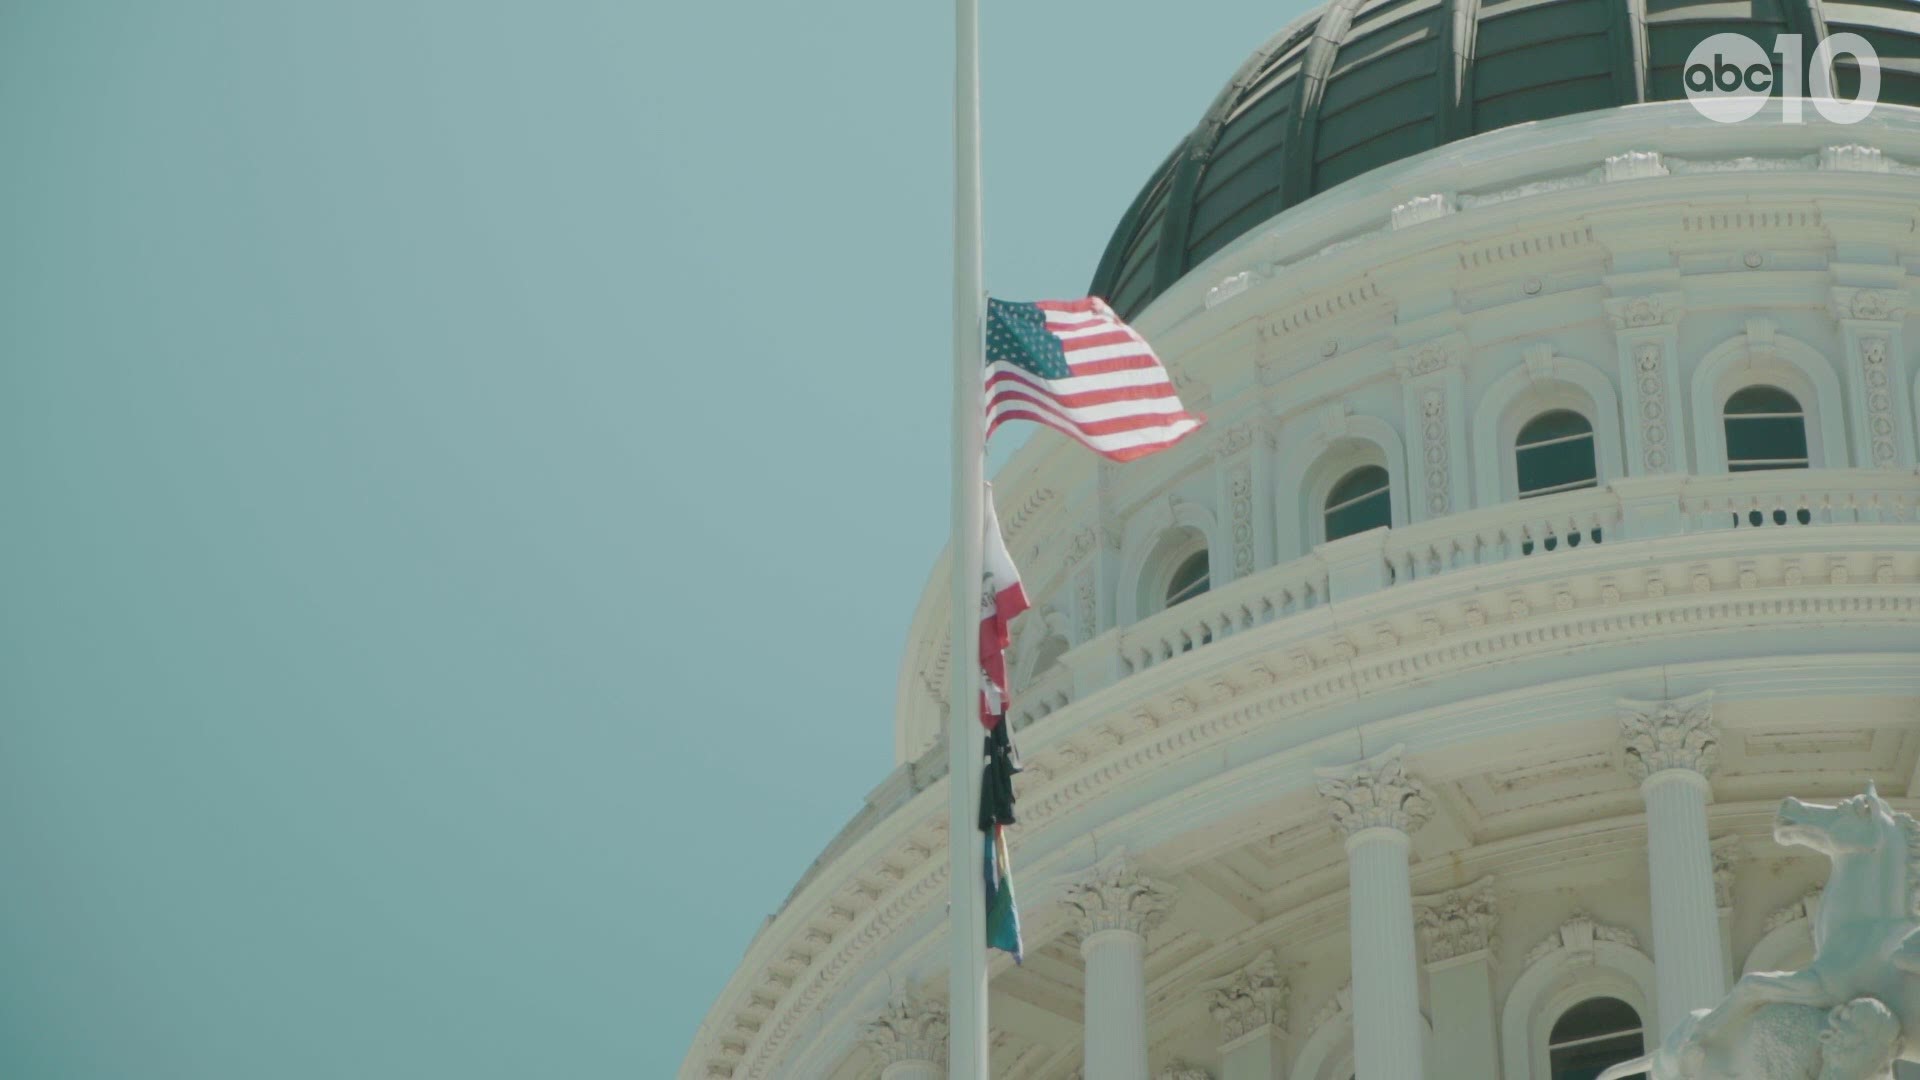 Flags at the California State Capitol are flying at half-staff in honor of fallen Sacramento Police Ofc. Tara O'Sullivan who was shot and killed Wednesday in North Sacramento.﻿

"Officer O’Sullivan represented the best of what we hope to be as human beings in her selfless service to the community and readiness to help those in need,” said Gov. Newsom. “She knew the dangers of the job, yet chose to dedicate herself at such a young age to those values anyway."﻿